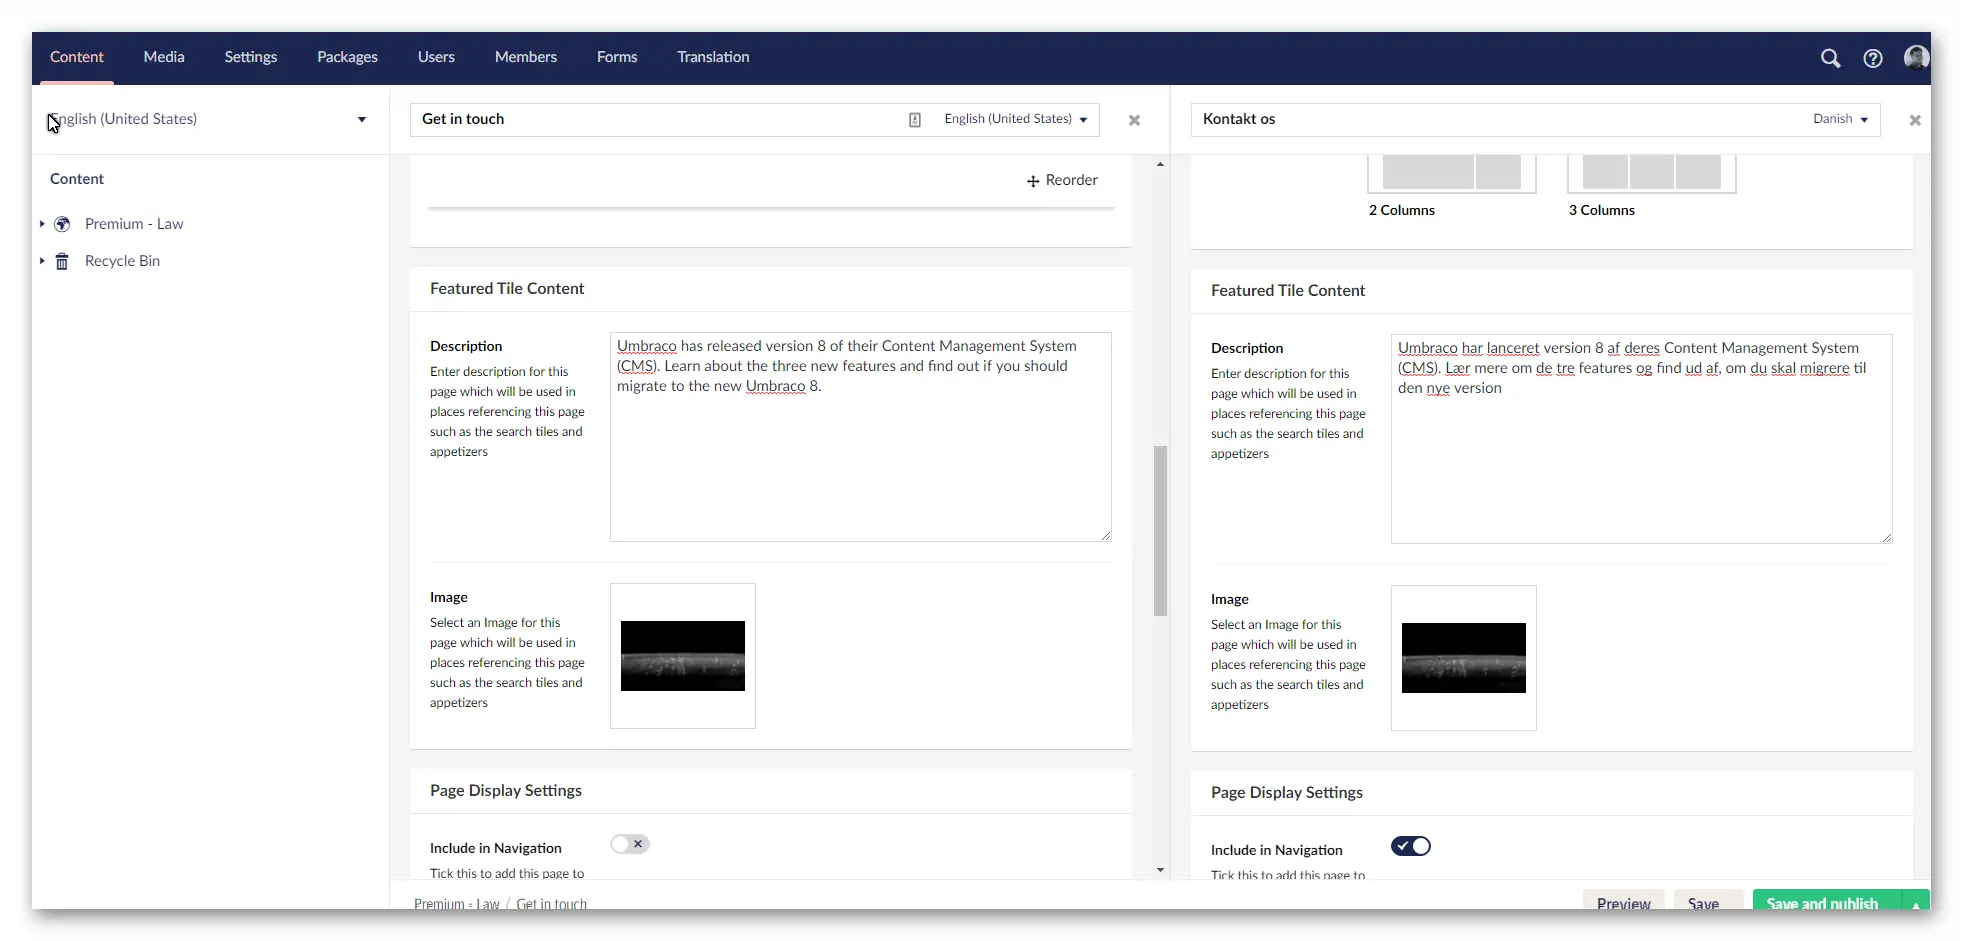 Screenshot of Umbraco CMS interface showing side-by-side content editing in different languages.